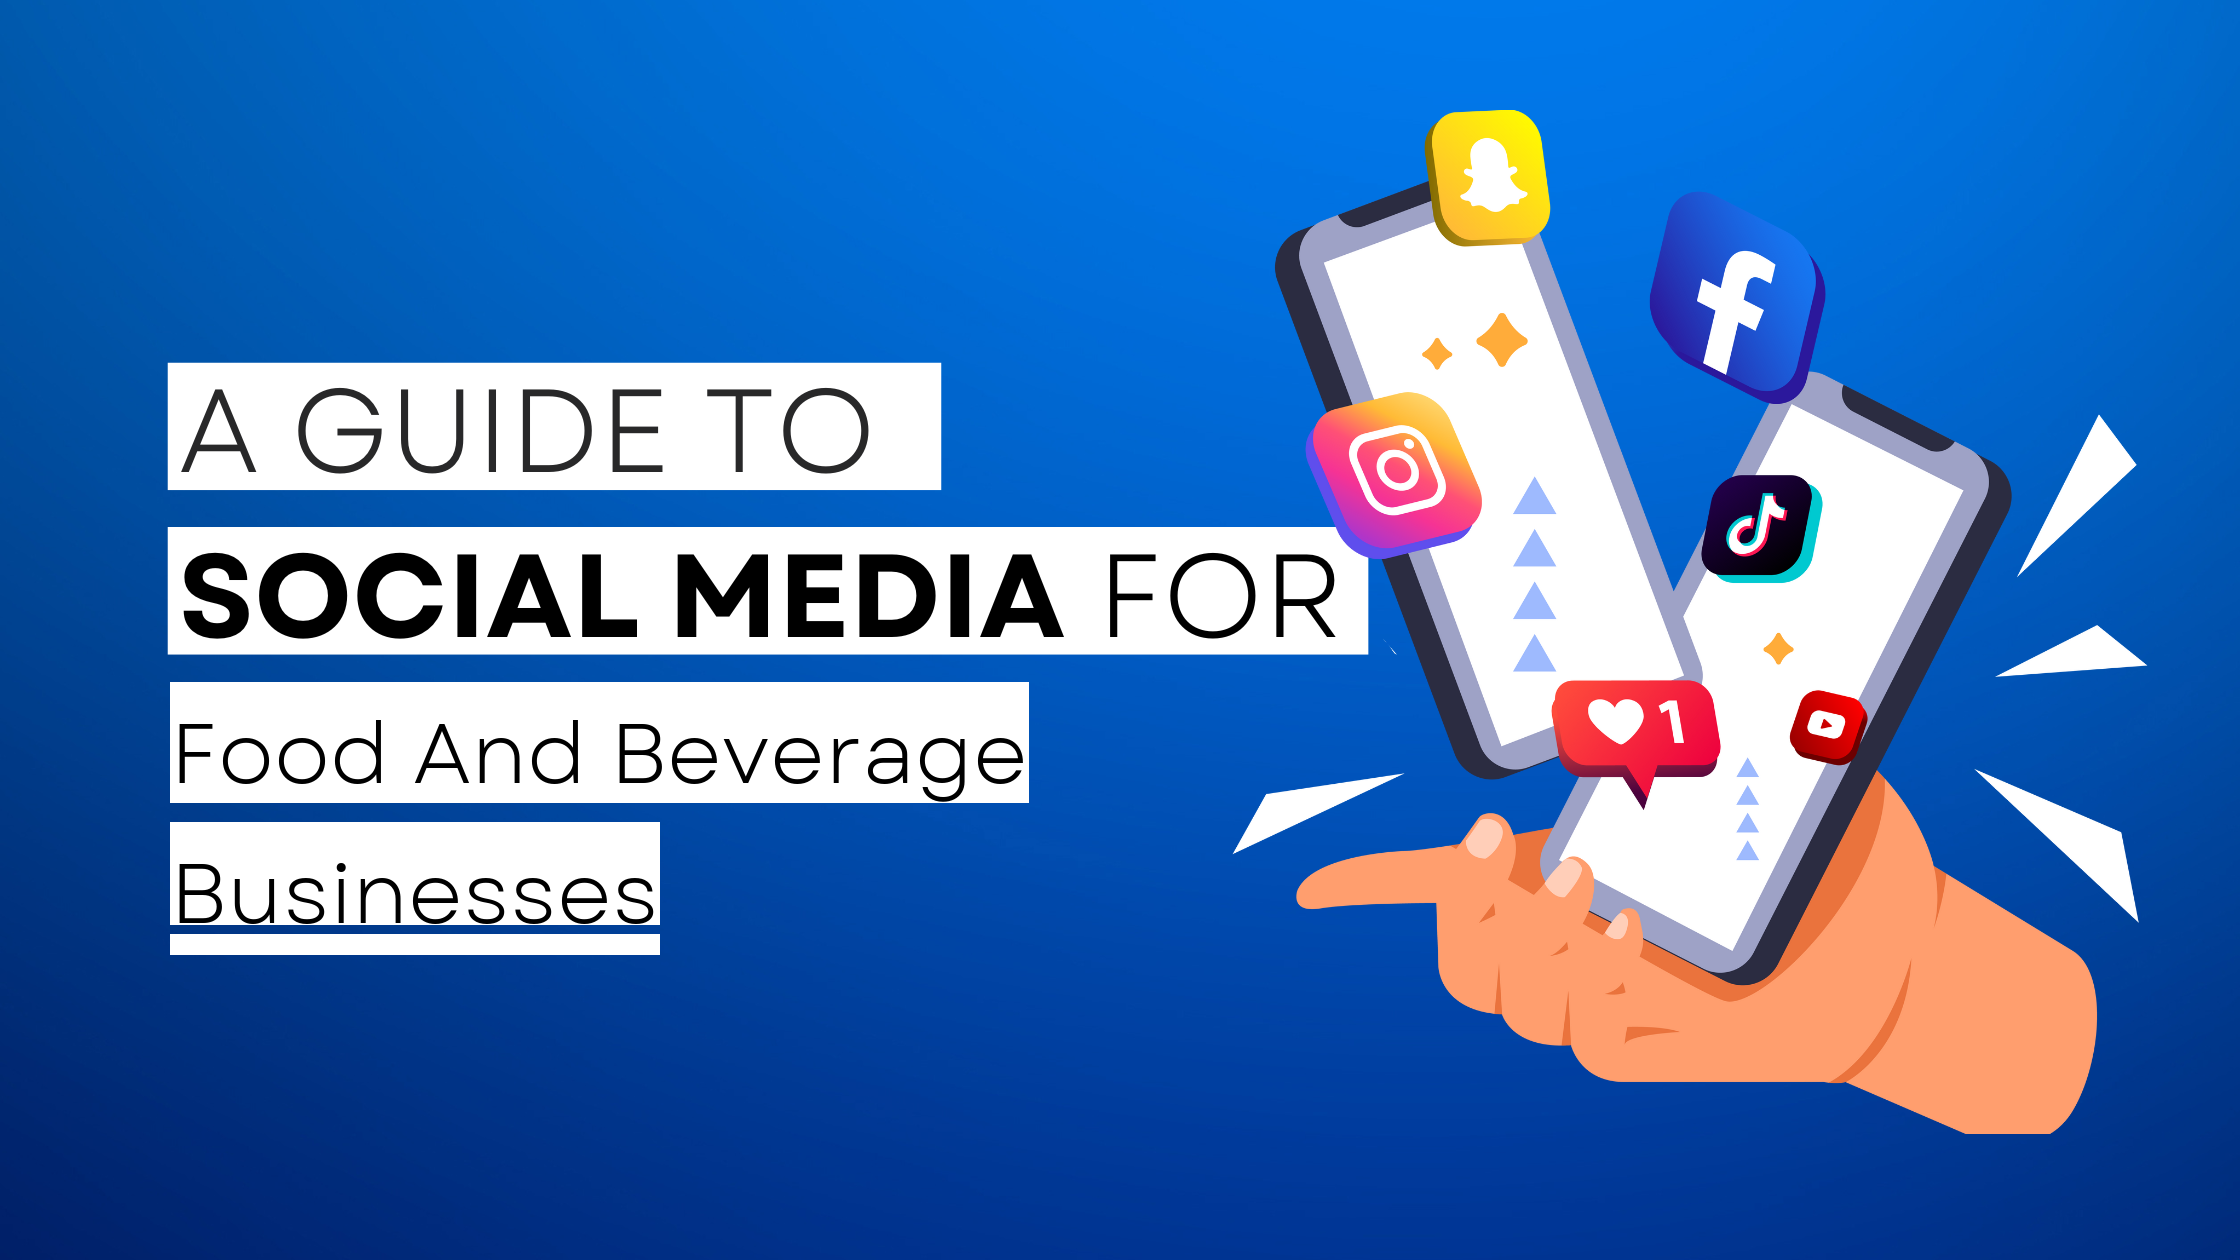 How to start Food And Beverage on social media